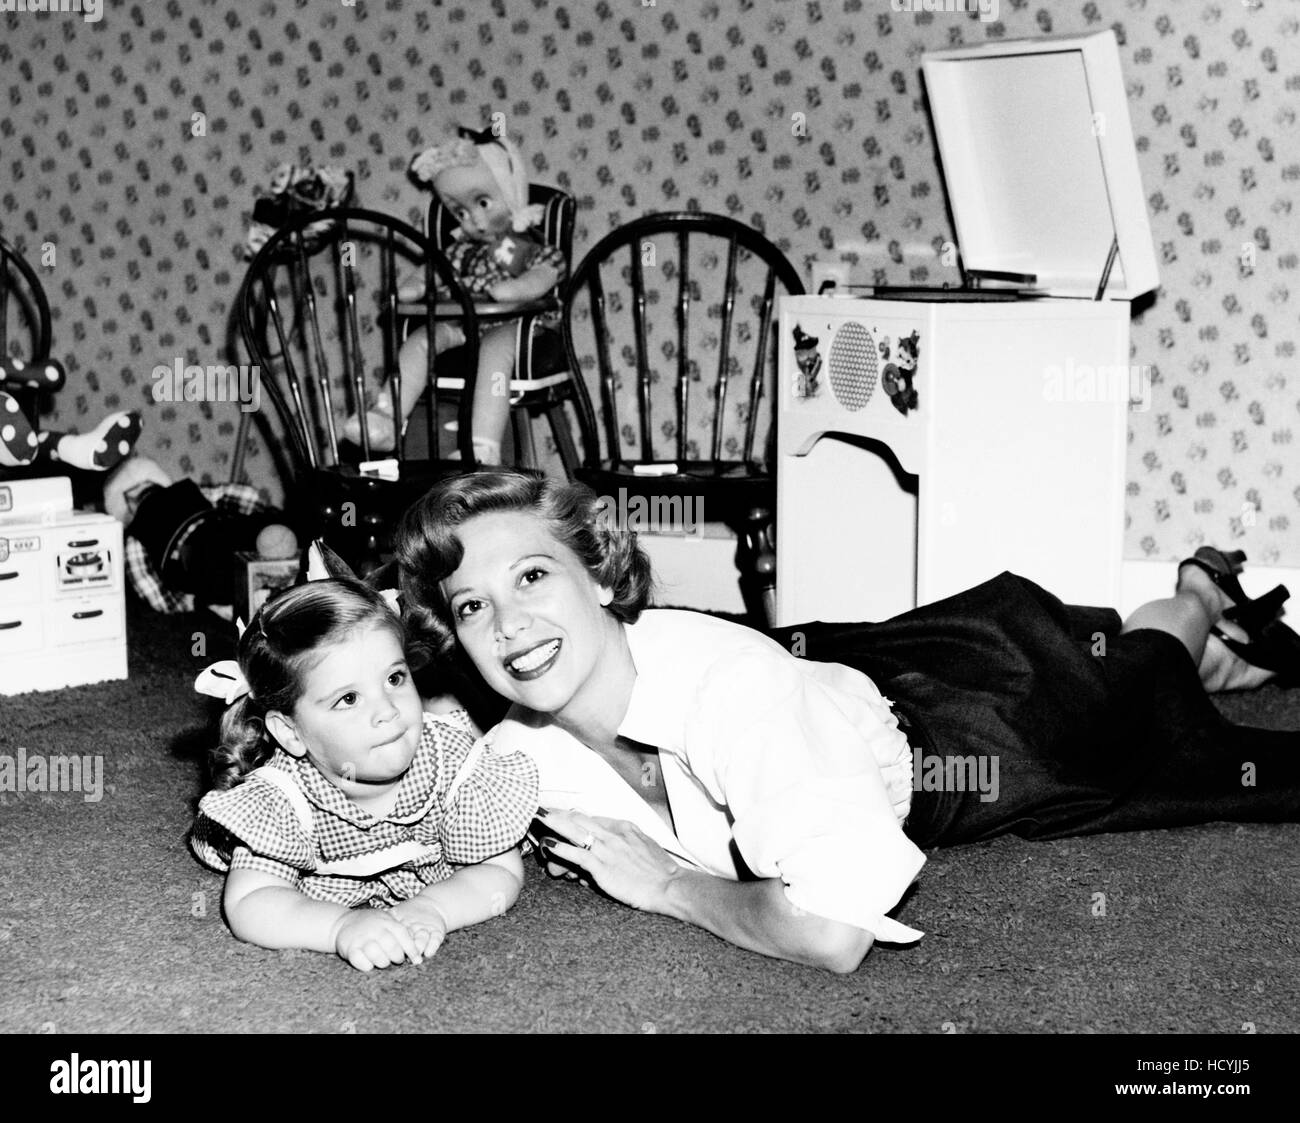 List 102+ Images missy” montgomery daughter of dinah shore Superb